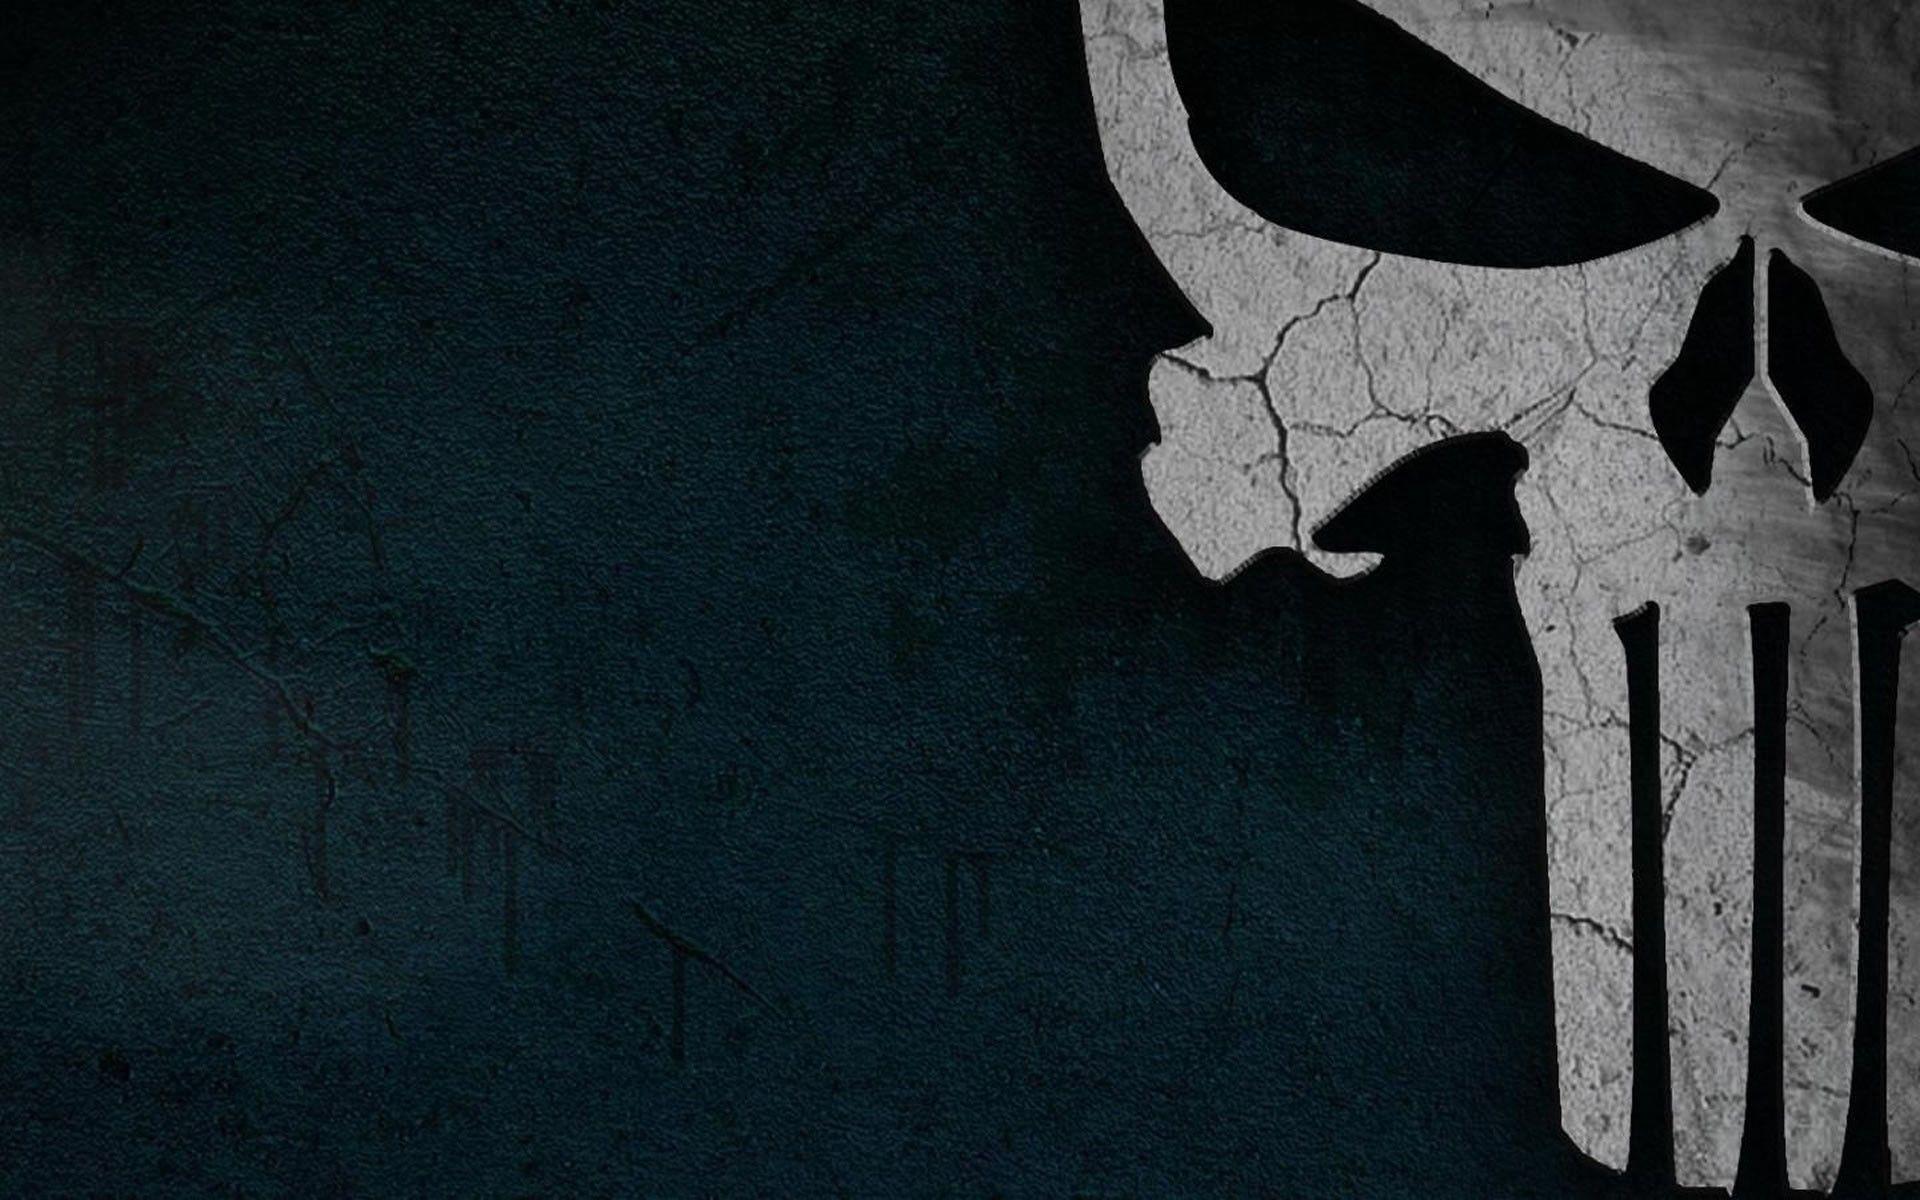 200 Punisher HD Wallpapers